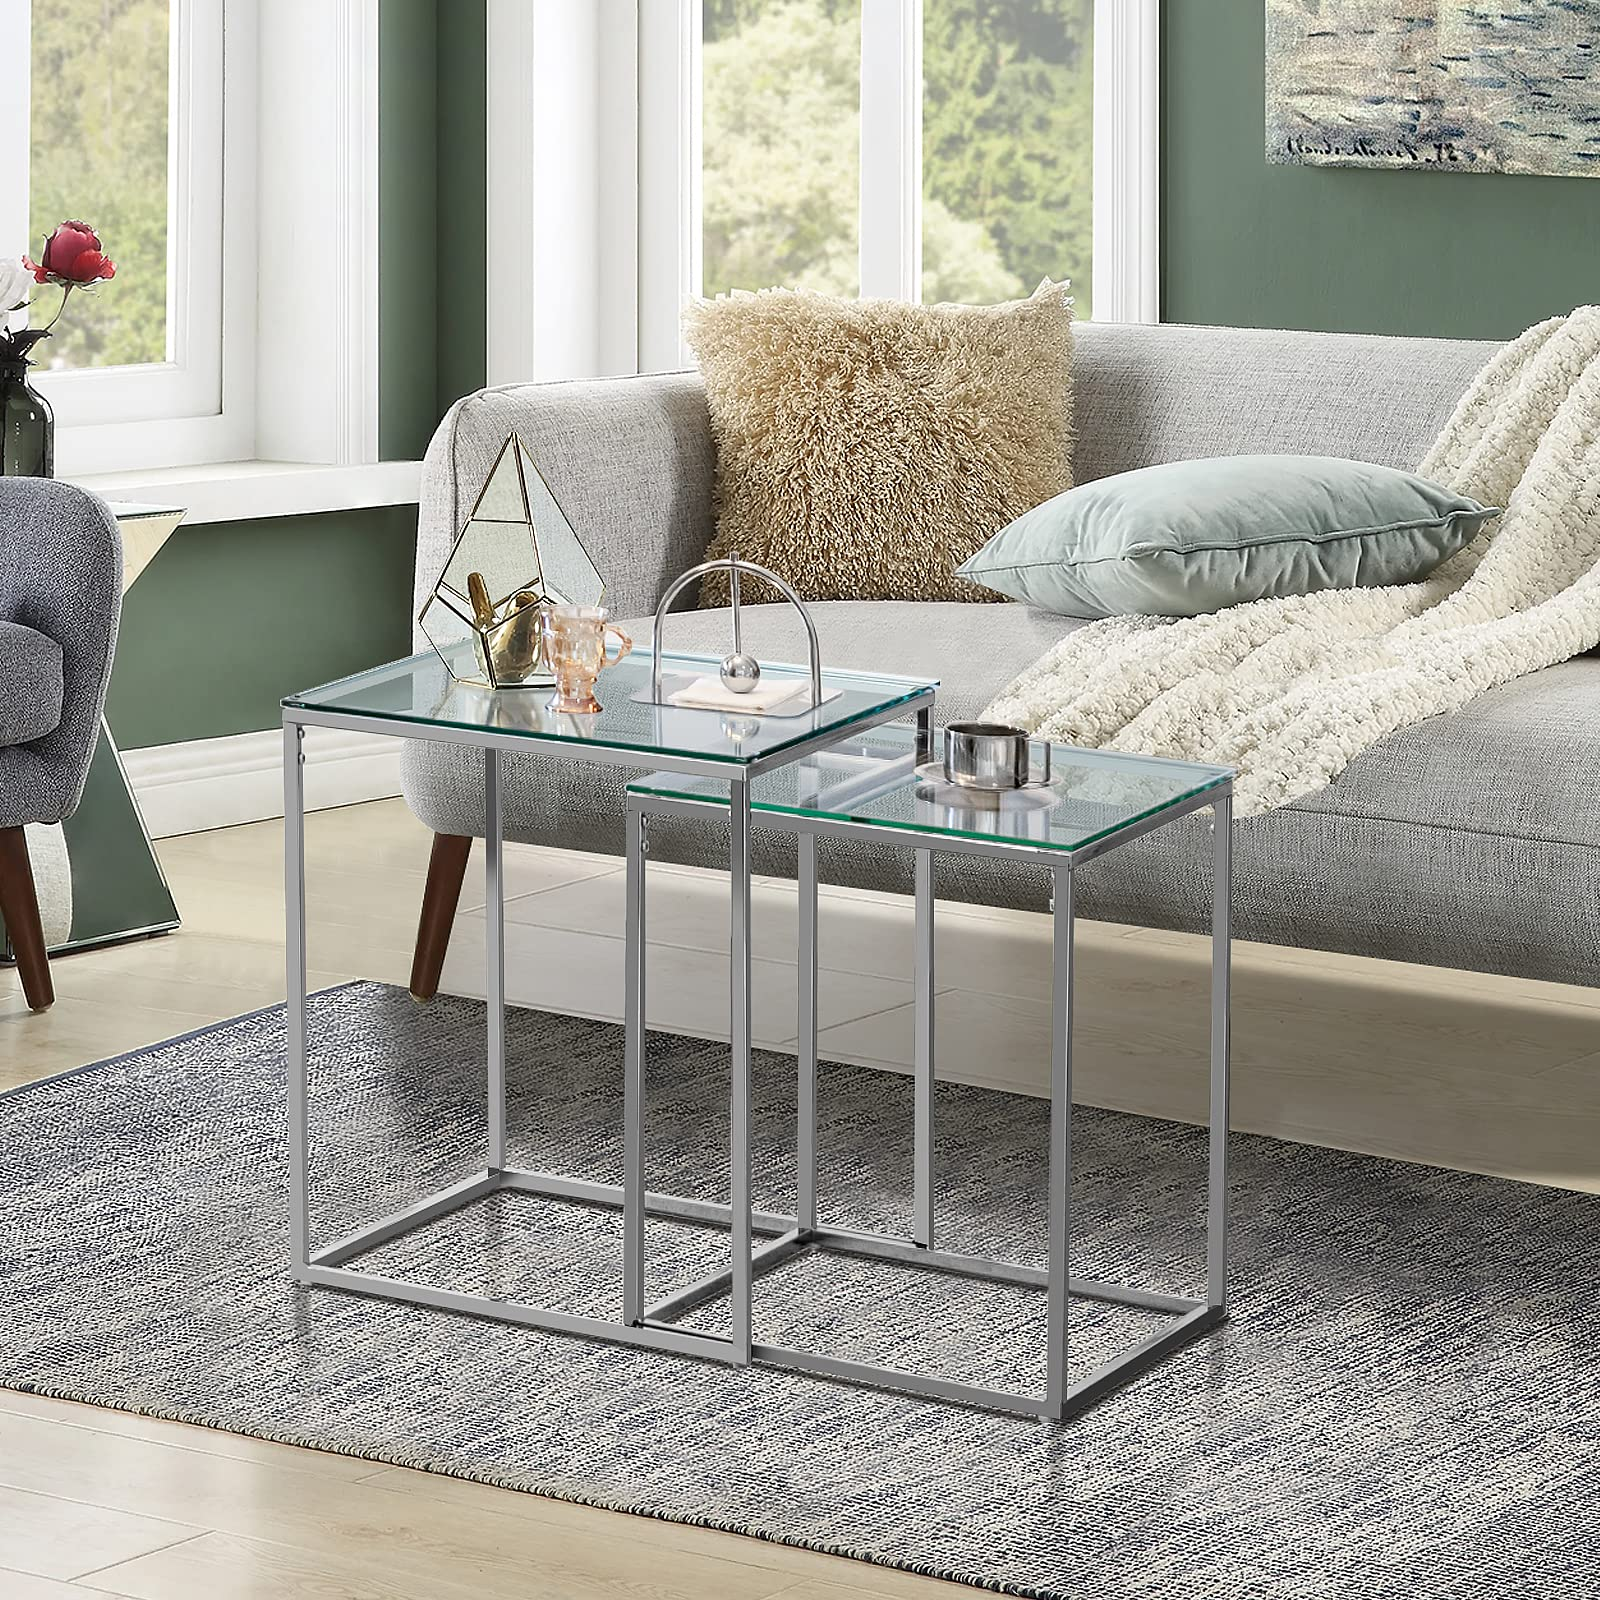 Giantex Nesting Table Set of 2 - Clear End Tables w/Tempered Glass Top & Silver Metal Frame